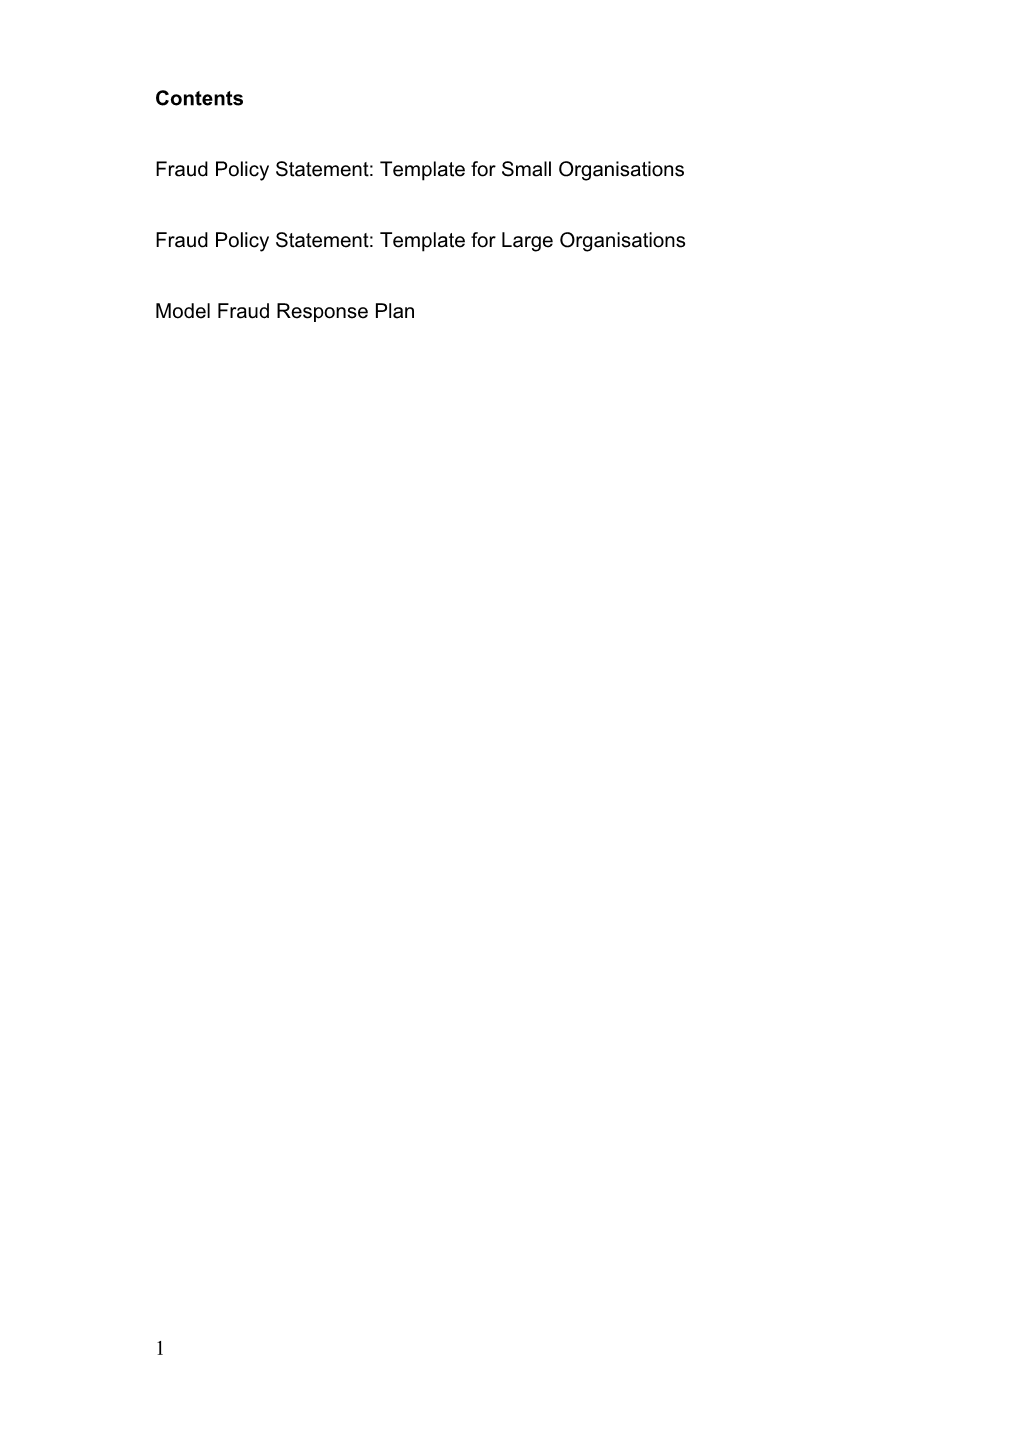 Fraud Policy Statement Templates and Fraud Response Plan